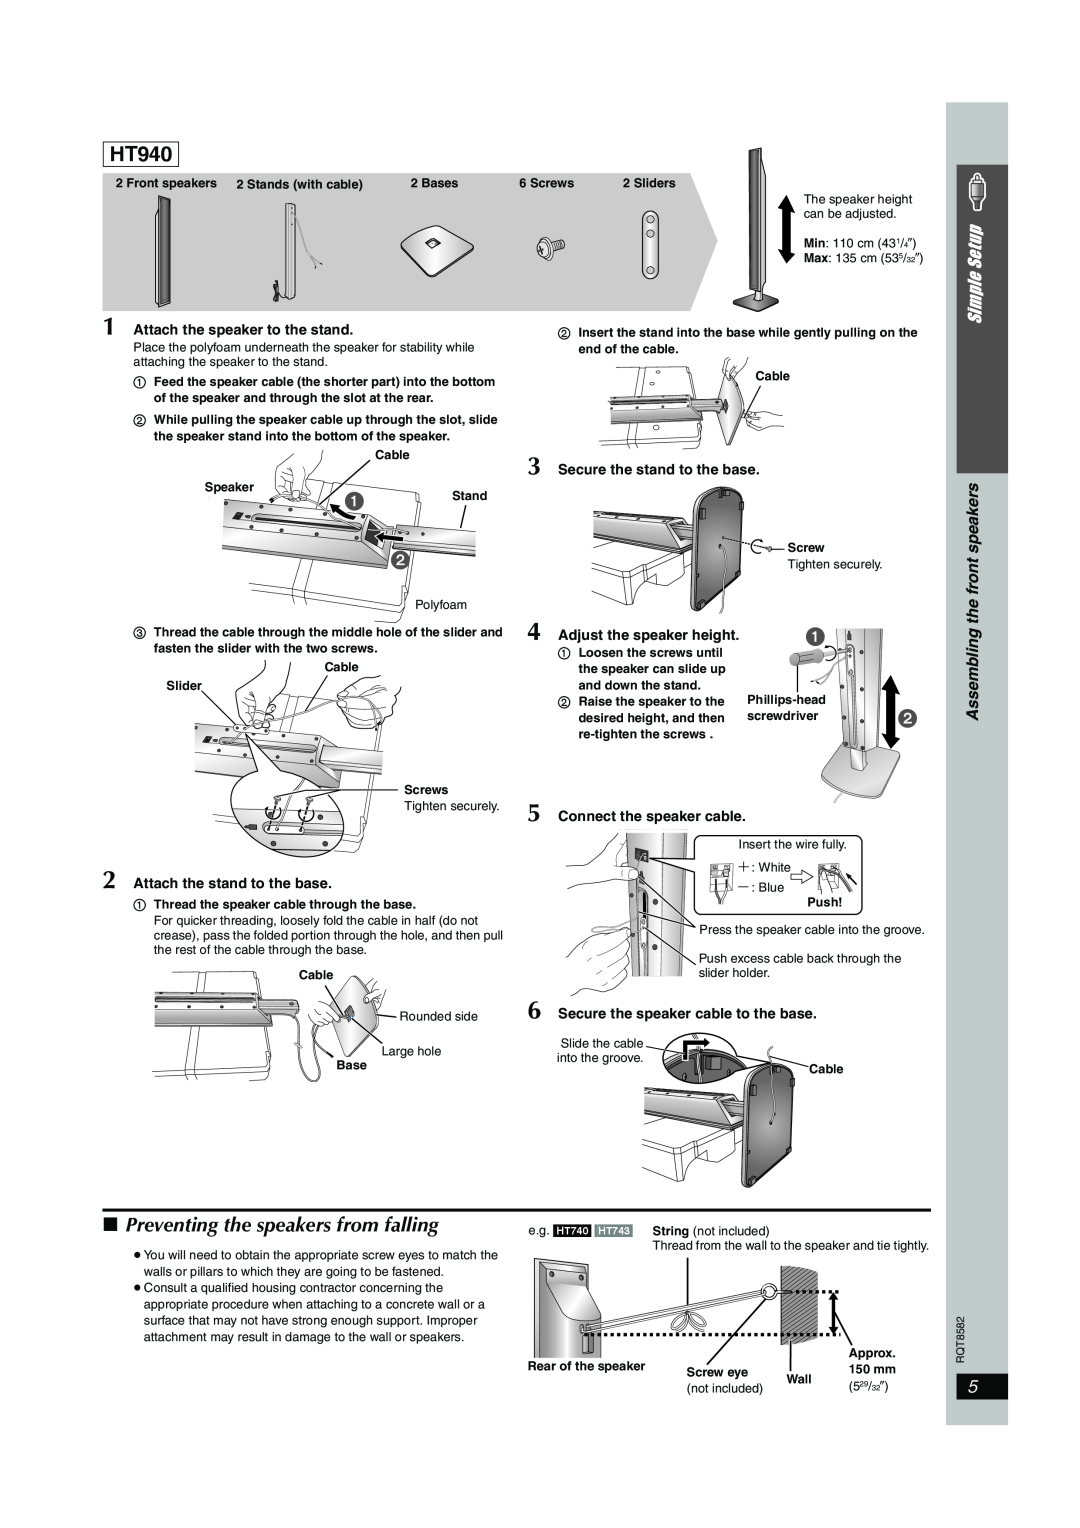 Panasonic SC-HT940, SC-HT740 Preventing the speakers from falling, 7 47PM, Simple Setup, Page5Friday,February 